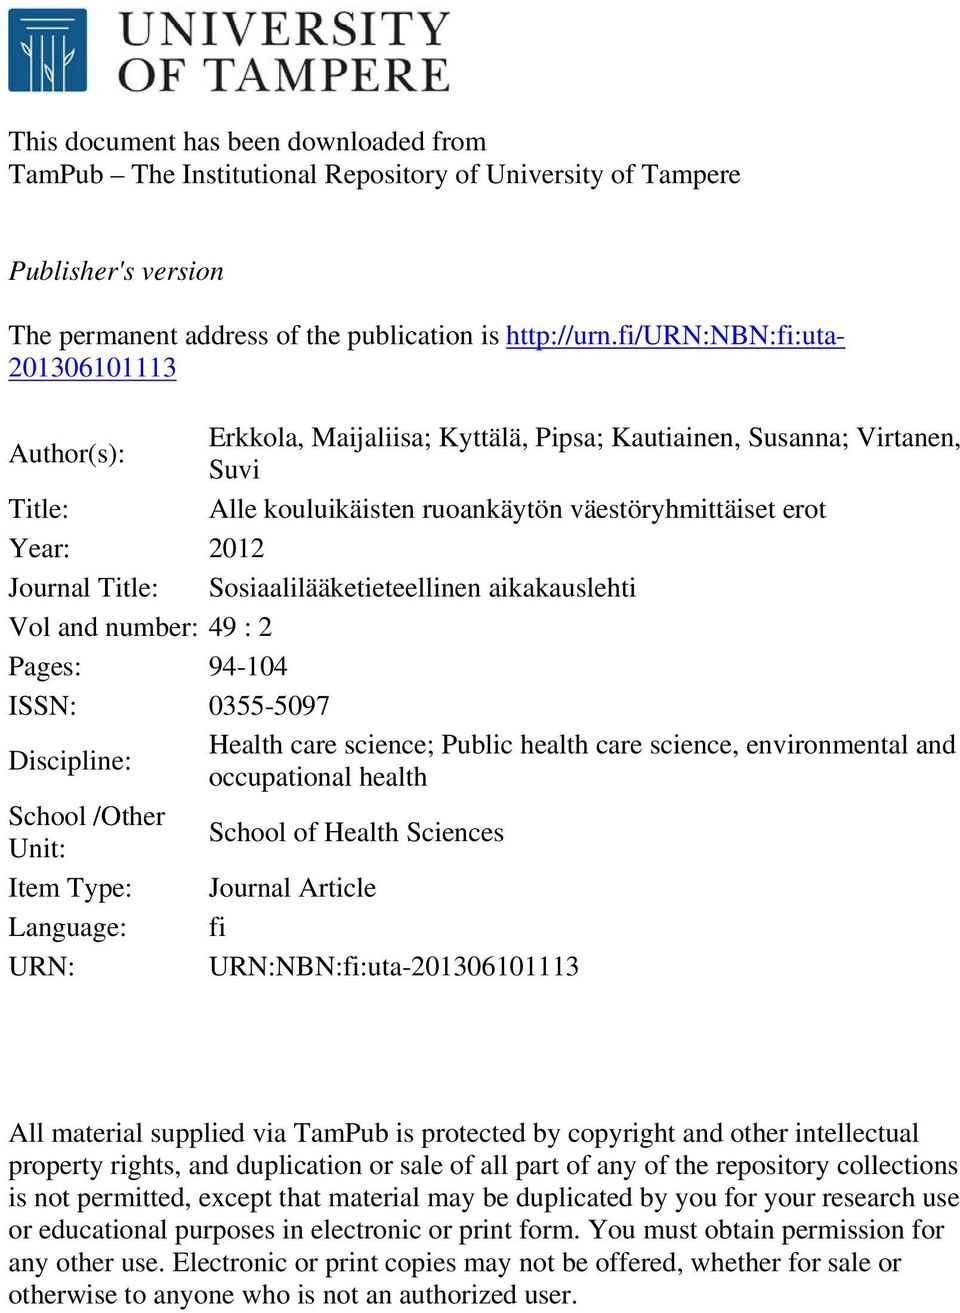 Title: Sosiaalilääketieteellinen aikakauslehti Vol and number: 49 : 2 Pages: 94-104 ISSN: 0355-5097 Discipline: Health care science; Public health care science, environmental and occupational health